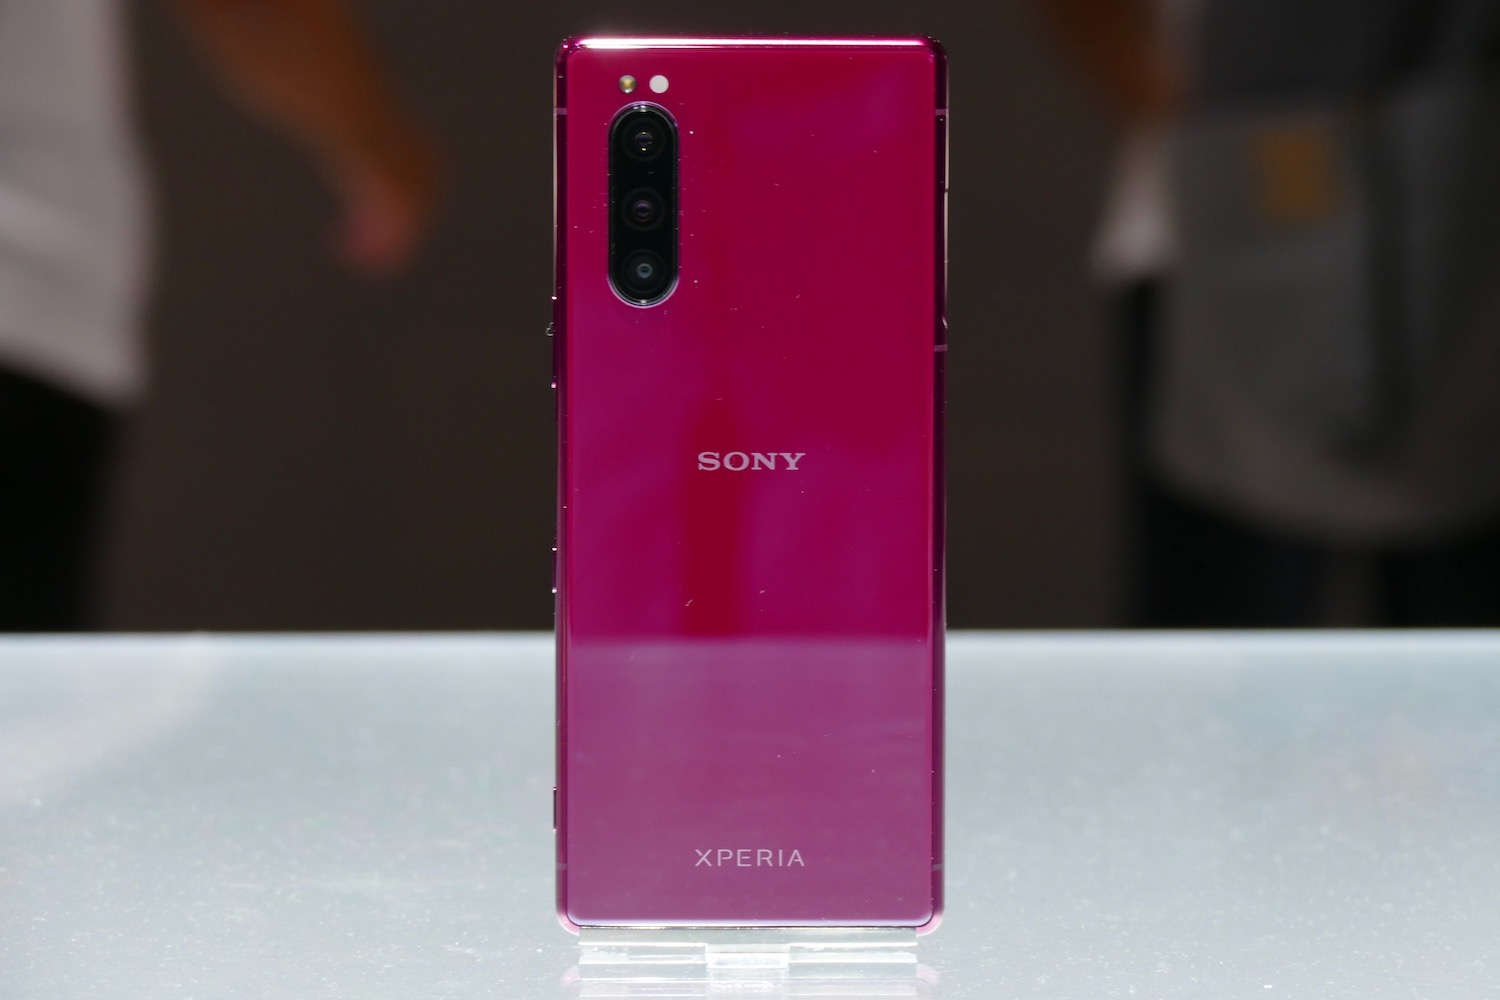 Xperia 5 Hands-on Review: Compact, But Far From A Winner | Digital Trends